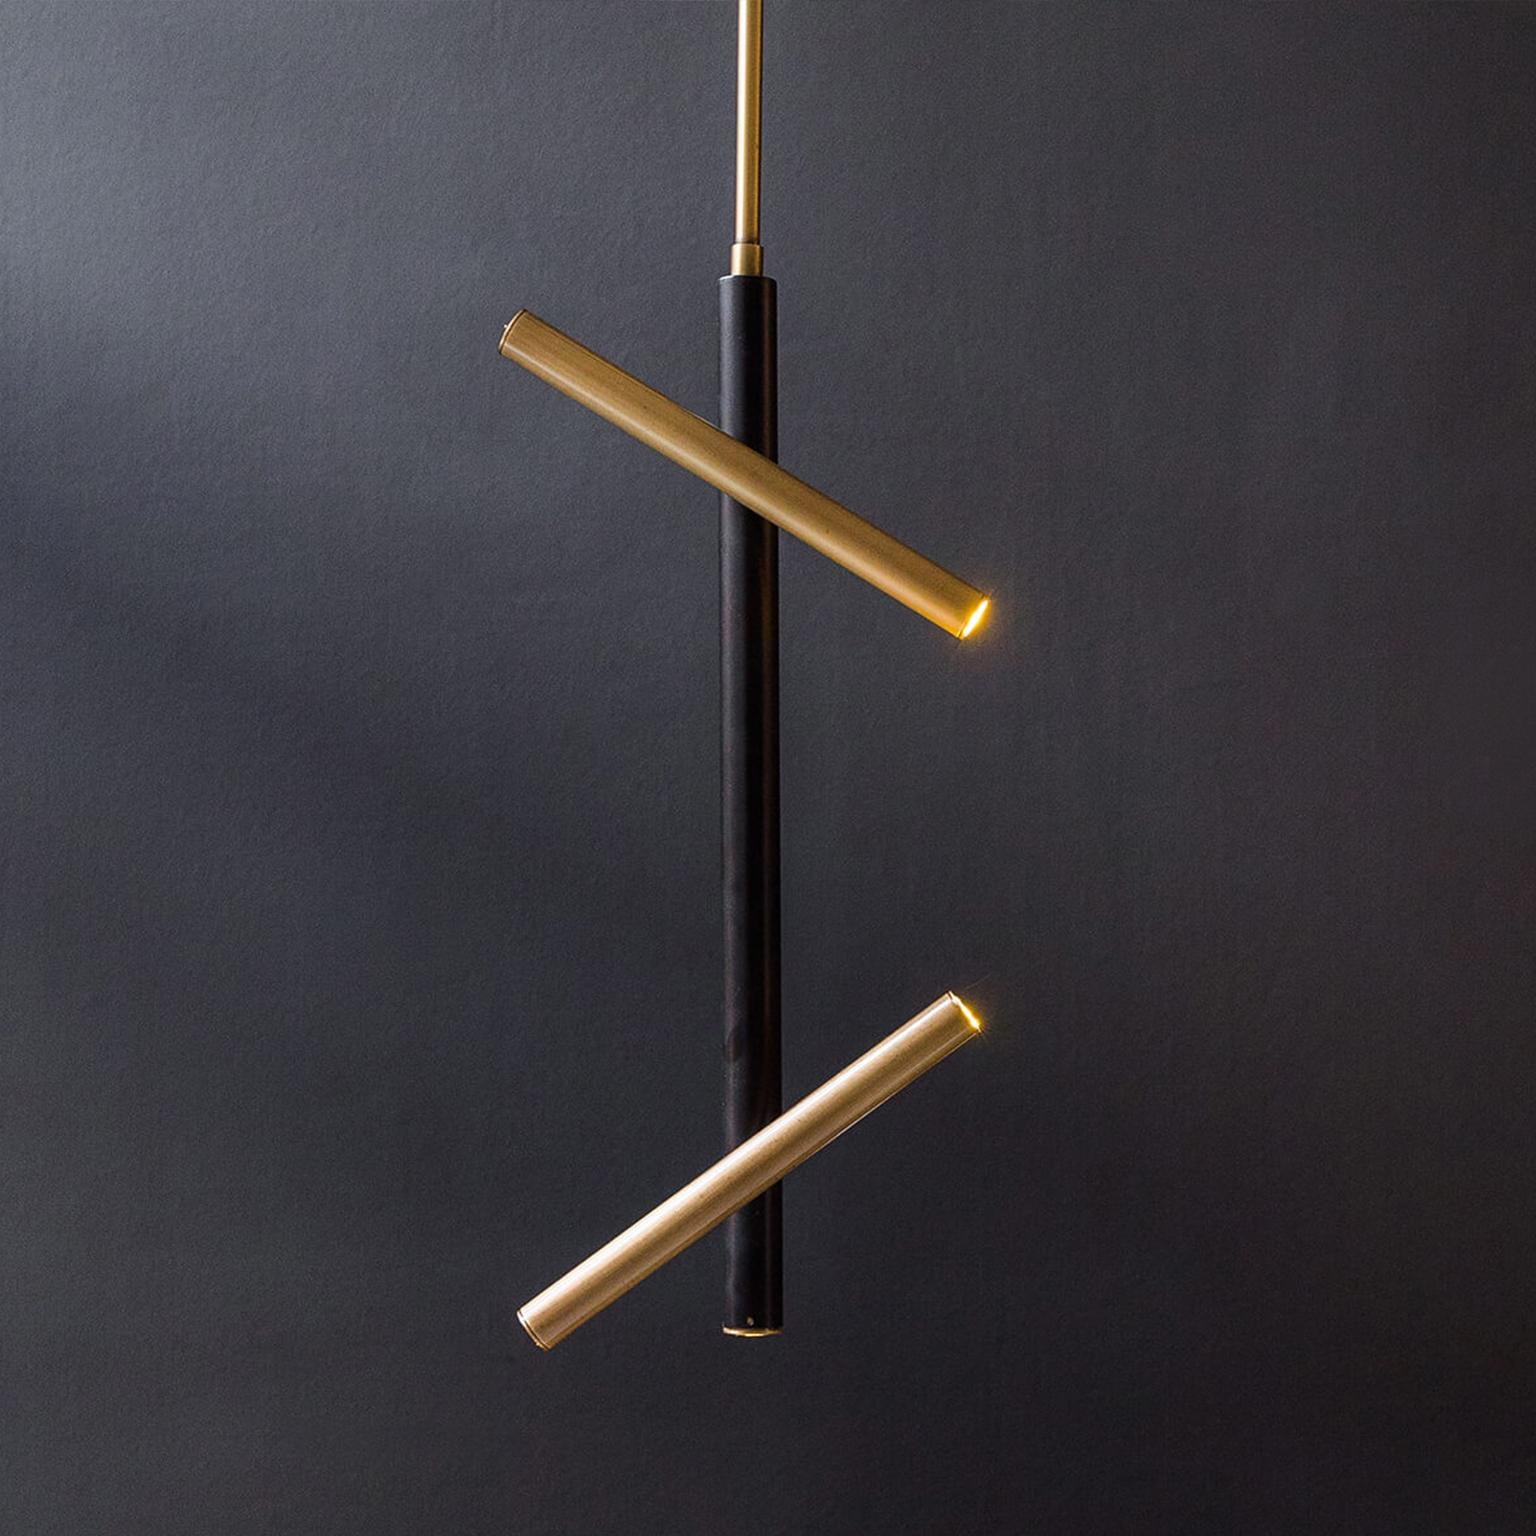 The irregular ceiling lamp is constructed with a combination of brass and black metal and its adjustable head allows you the freedom to light your environment as you like.

Measures: length: 8.6'' / depth: 8.6'' / height: 48.8''


-Brass plated